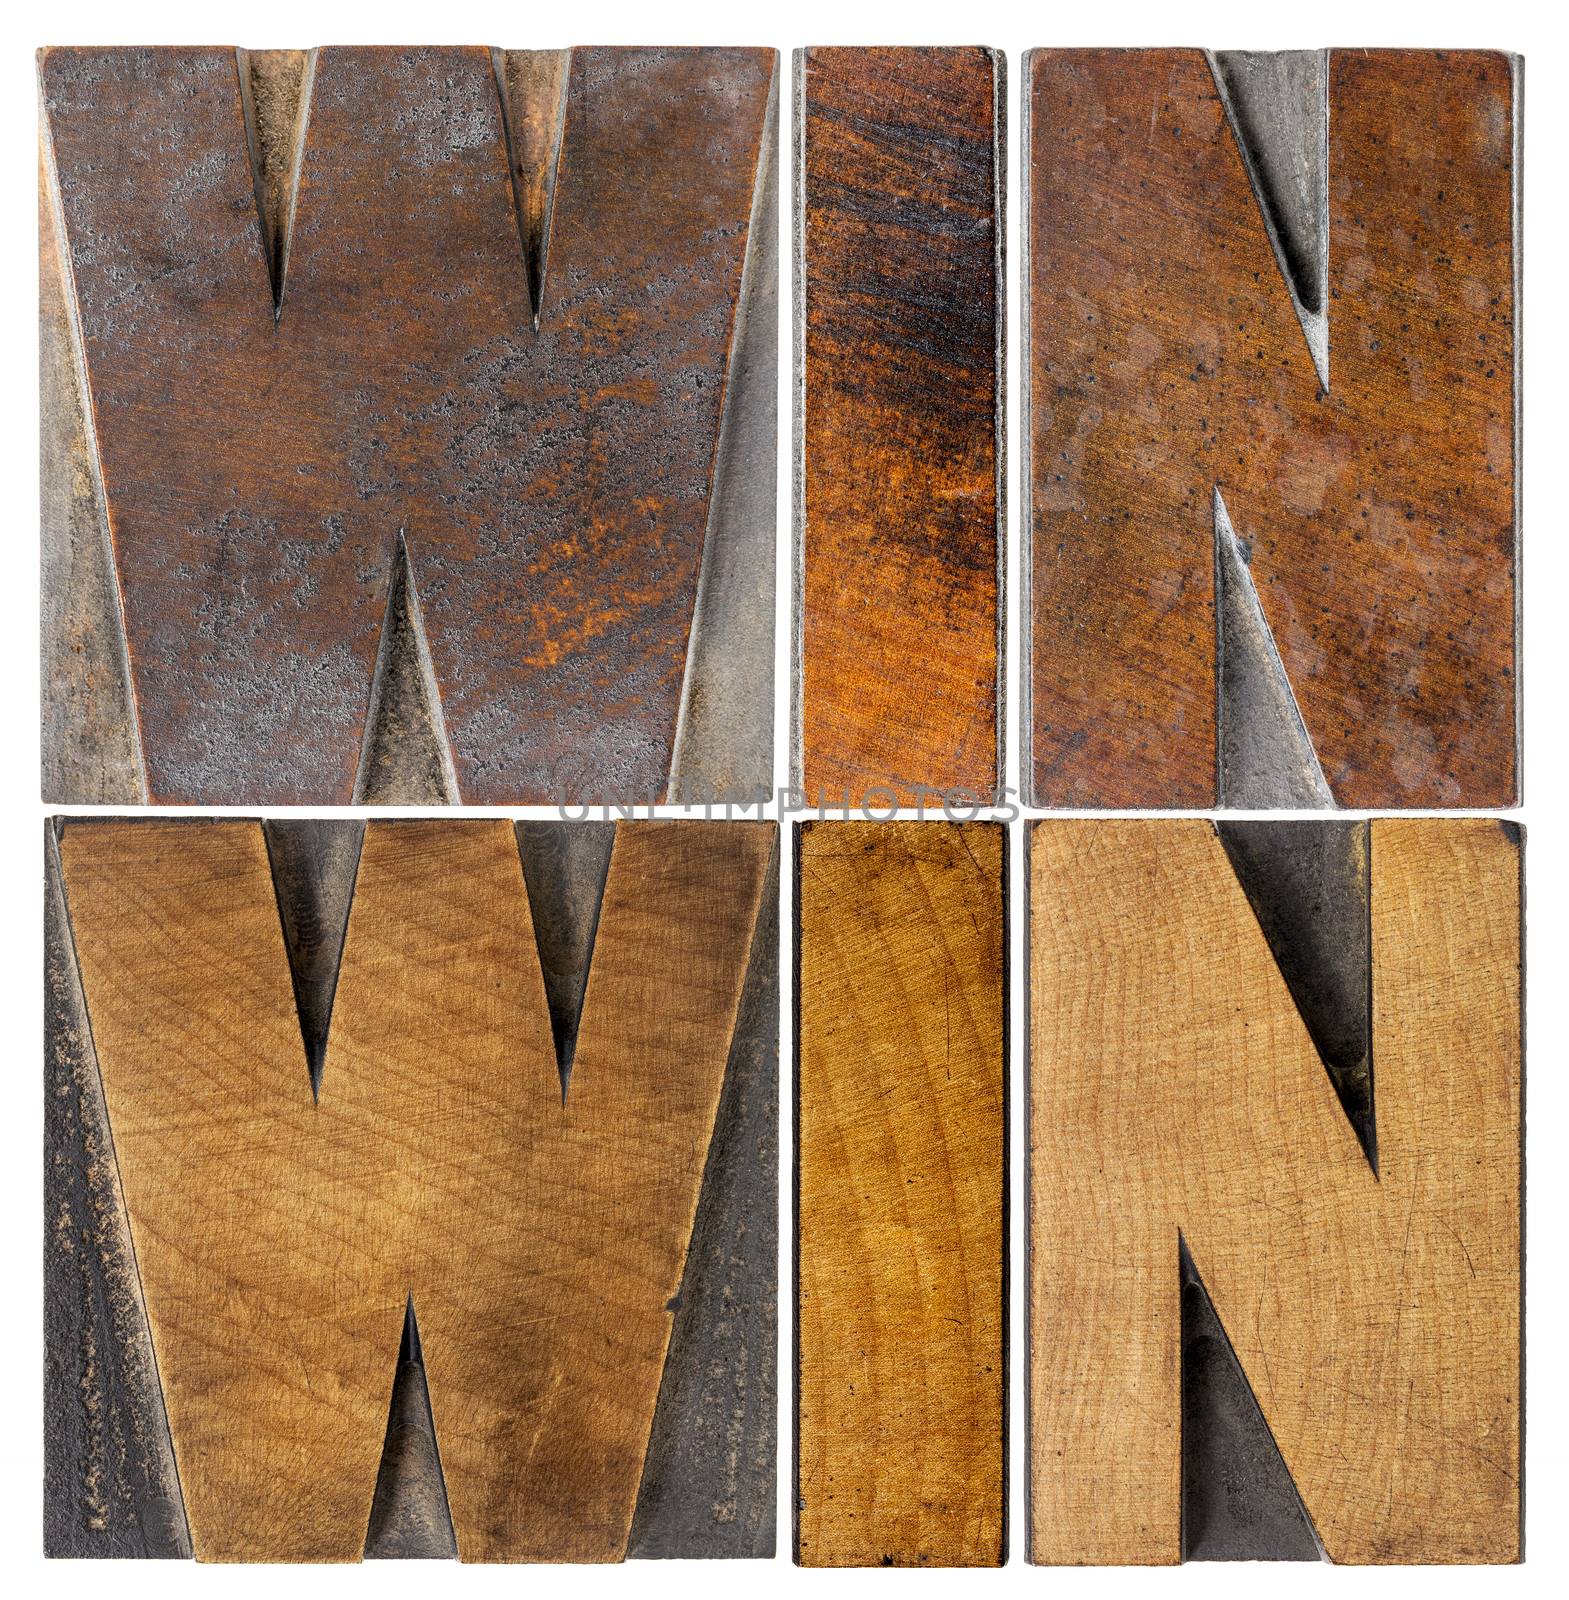 win-win - negotiation or conflict resolution strategy  -  isolated word abstract in vintage letterpress wood type